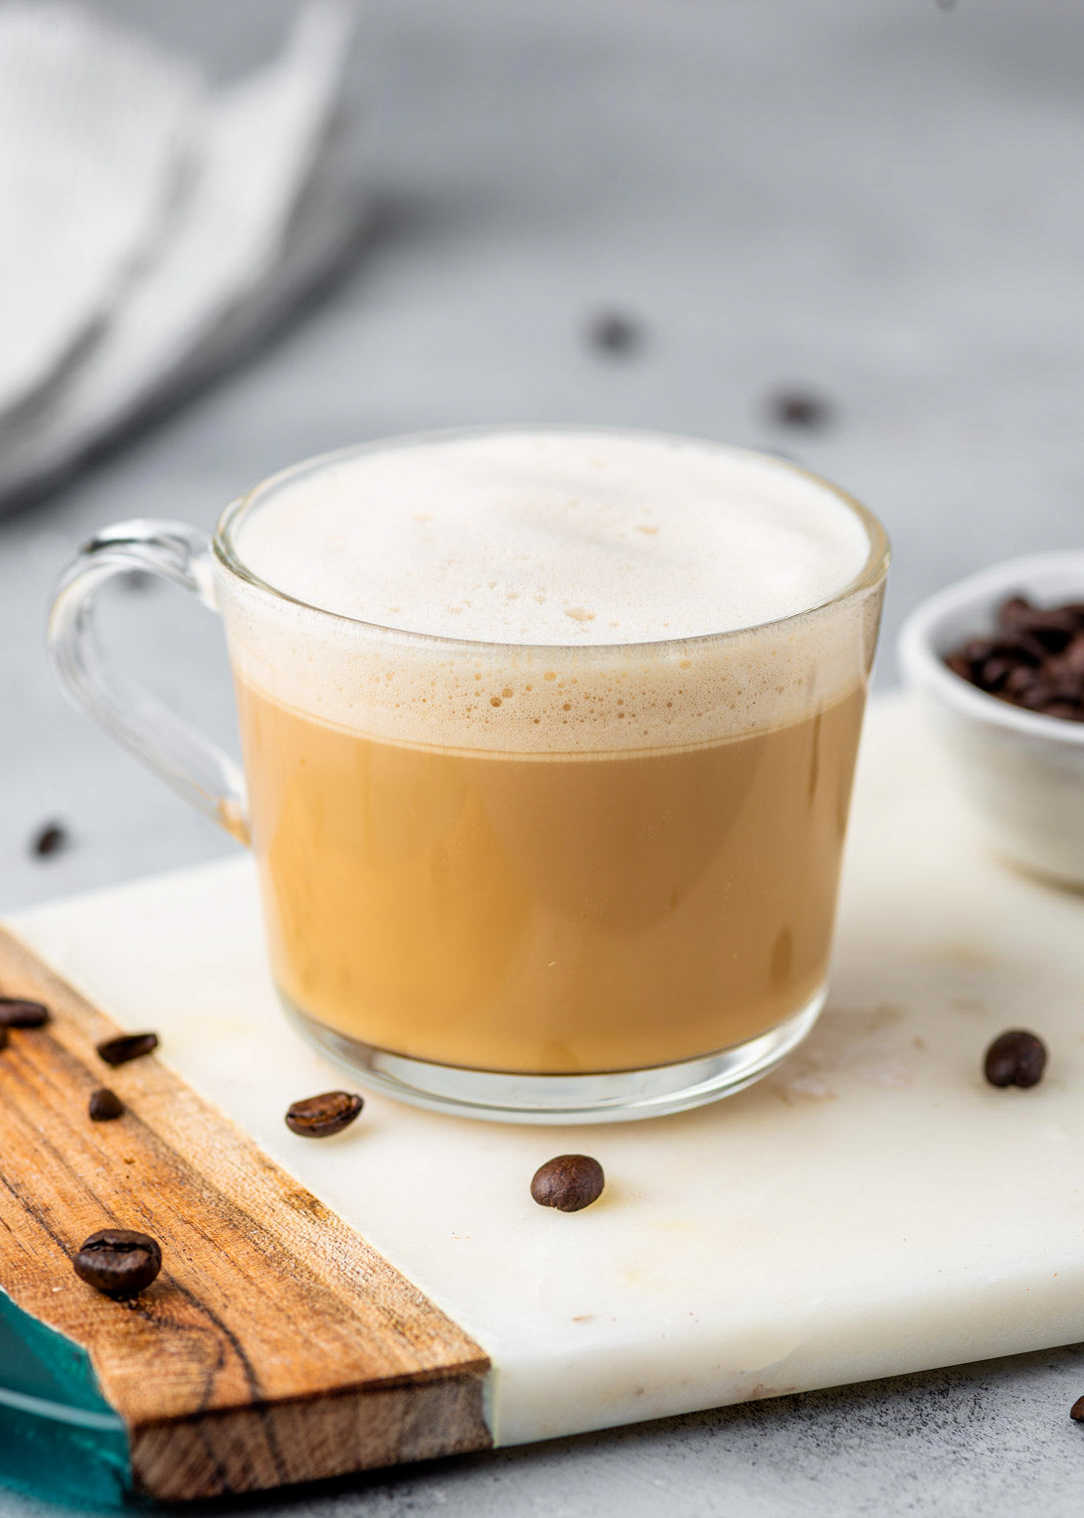 https://gimmedelicious.com/wp-content/uploads/2021/04/Keto-Bullet-Proof-Coffee-2.jpg